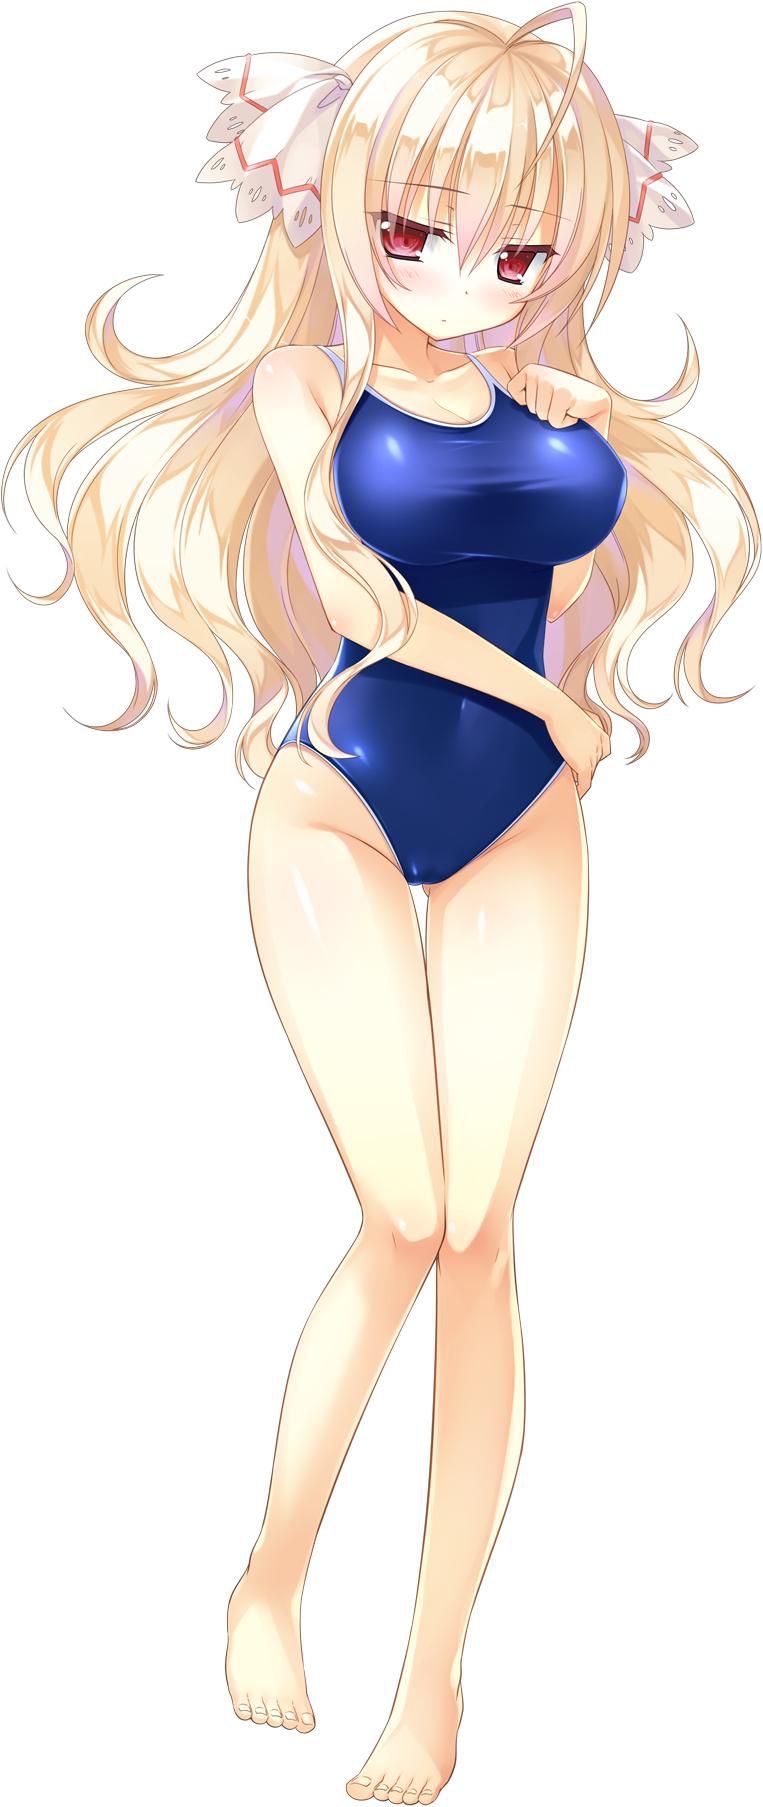 [Swimsuit] I can't wait for summer! Swimsuit beautiful girl is erotic Moe! 2 [2-d] 13